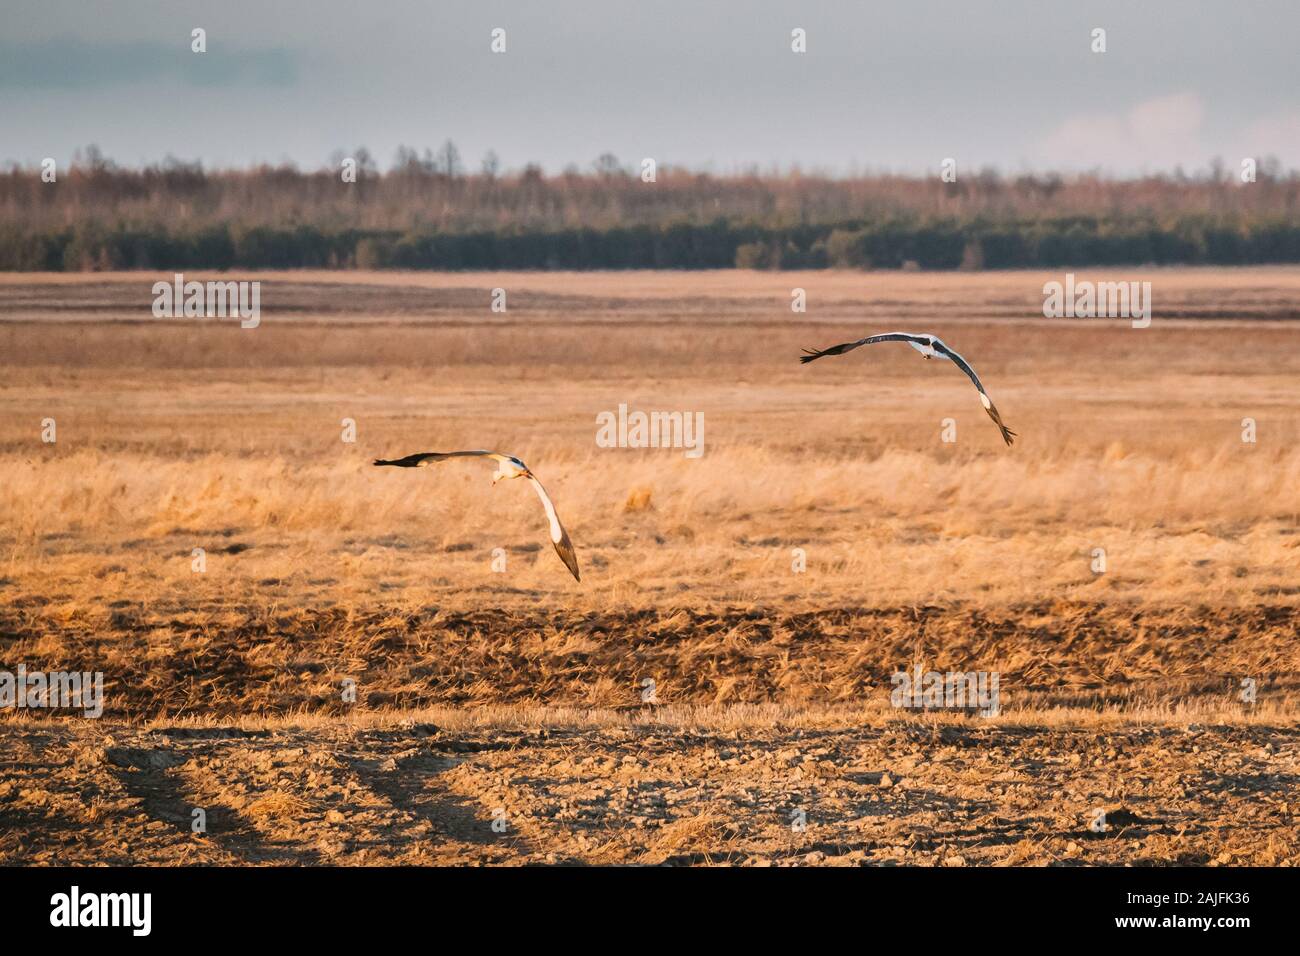 Two European White Stork Ciconia Ciconia Flying Above Spring Field in Belarus. Stock Photo